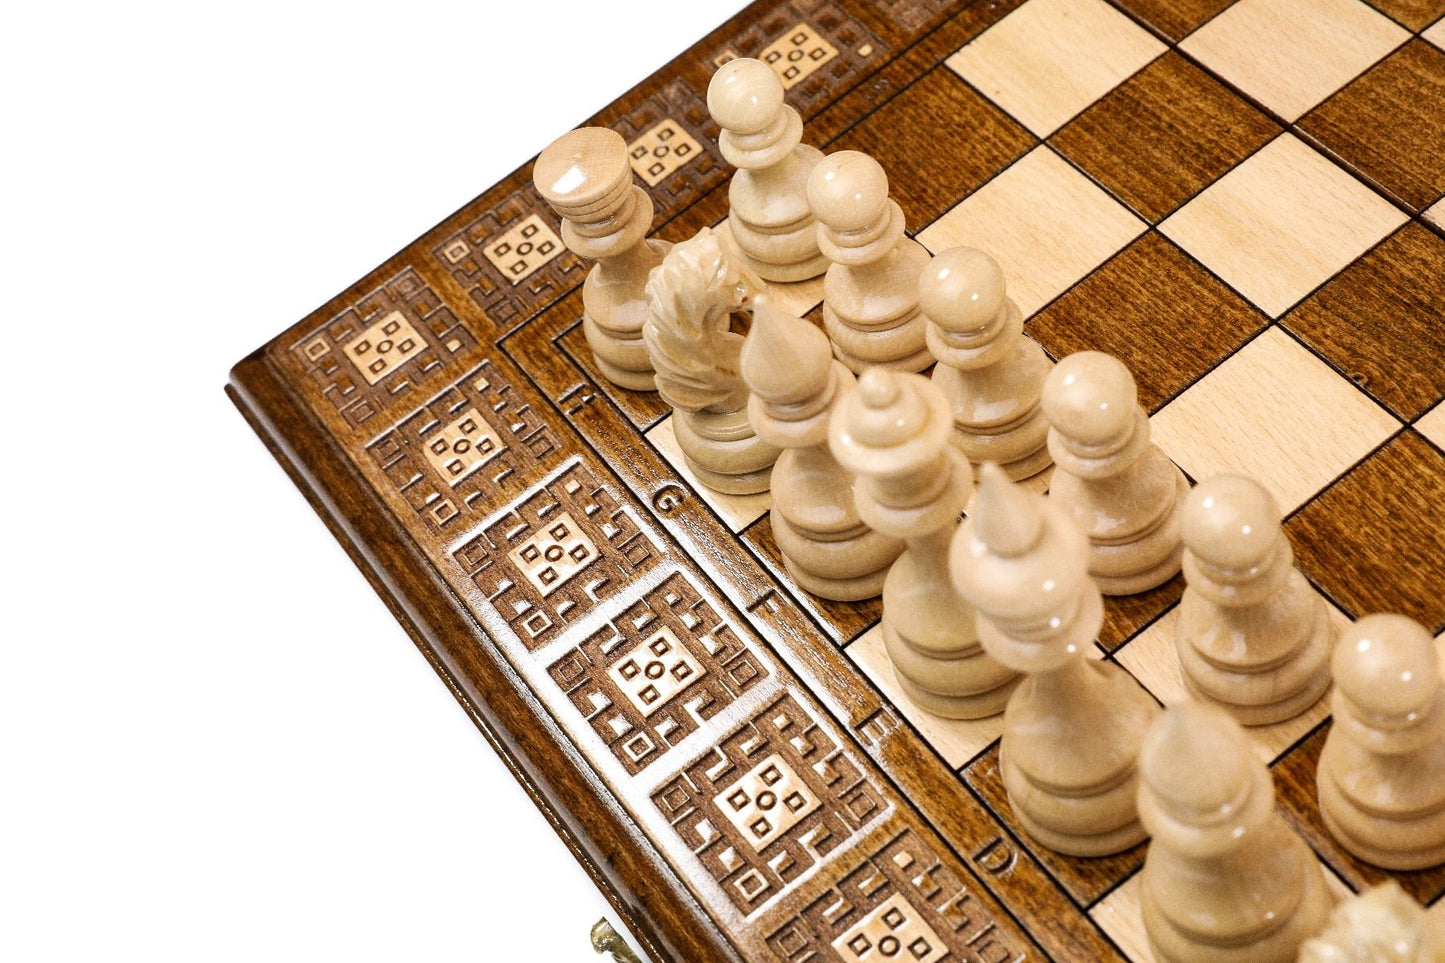 Let each game unfold with the Unique Chess Set with Carpet Pattern, where strategy and art converge in a celebration of global craftsmanship.